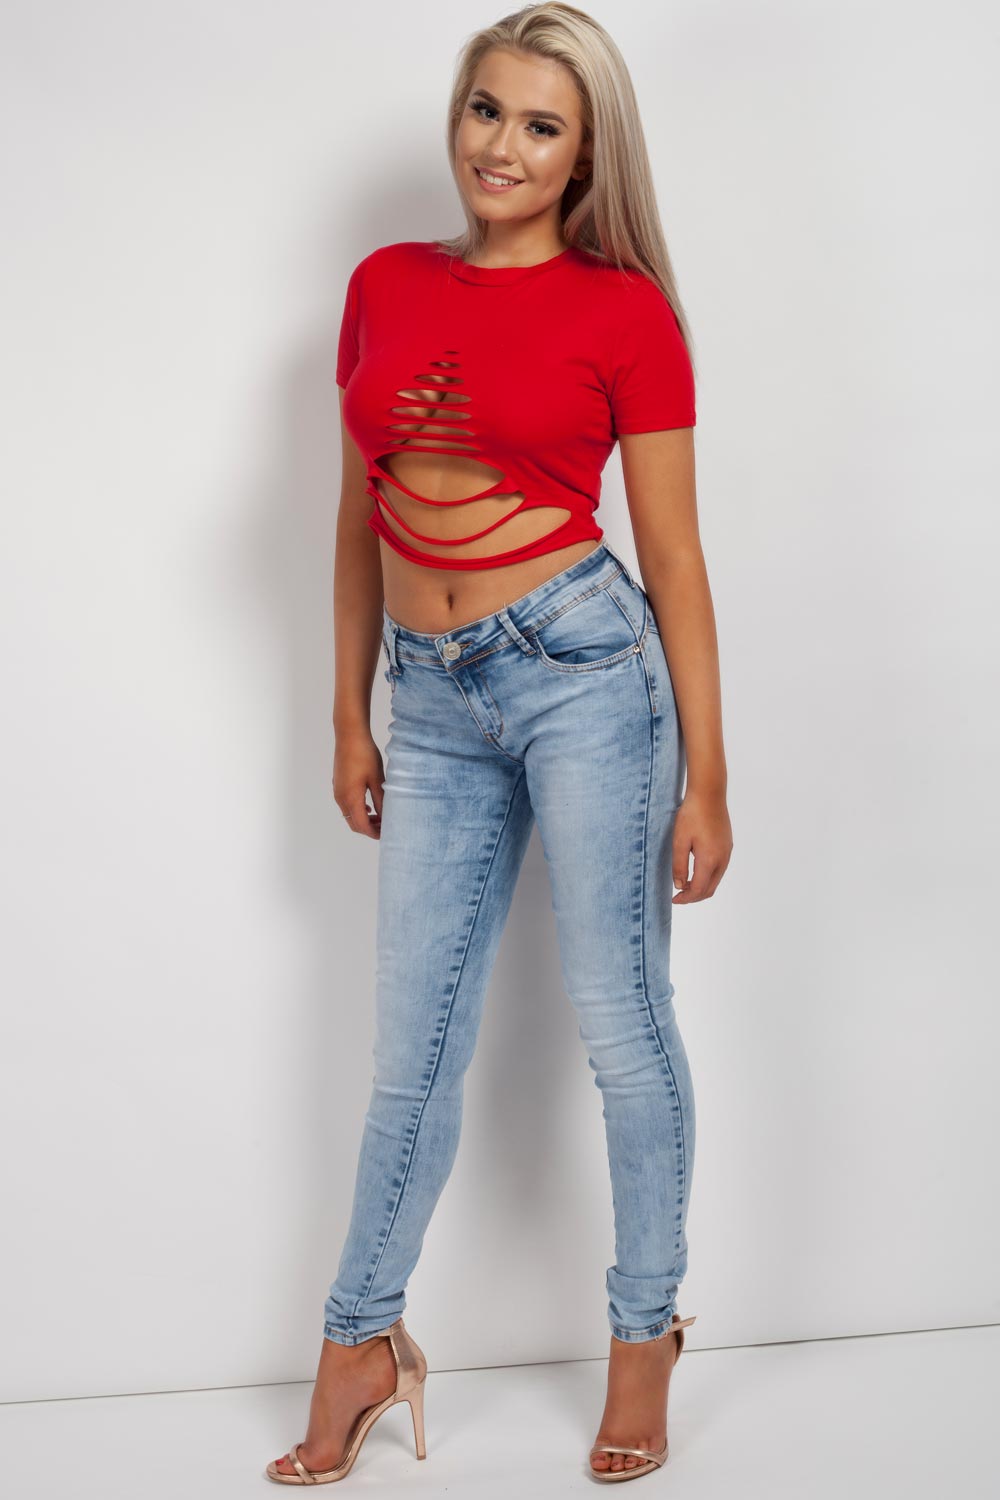 festival cropped top red 